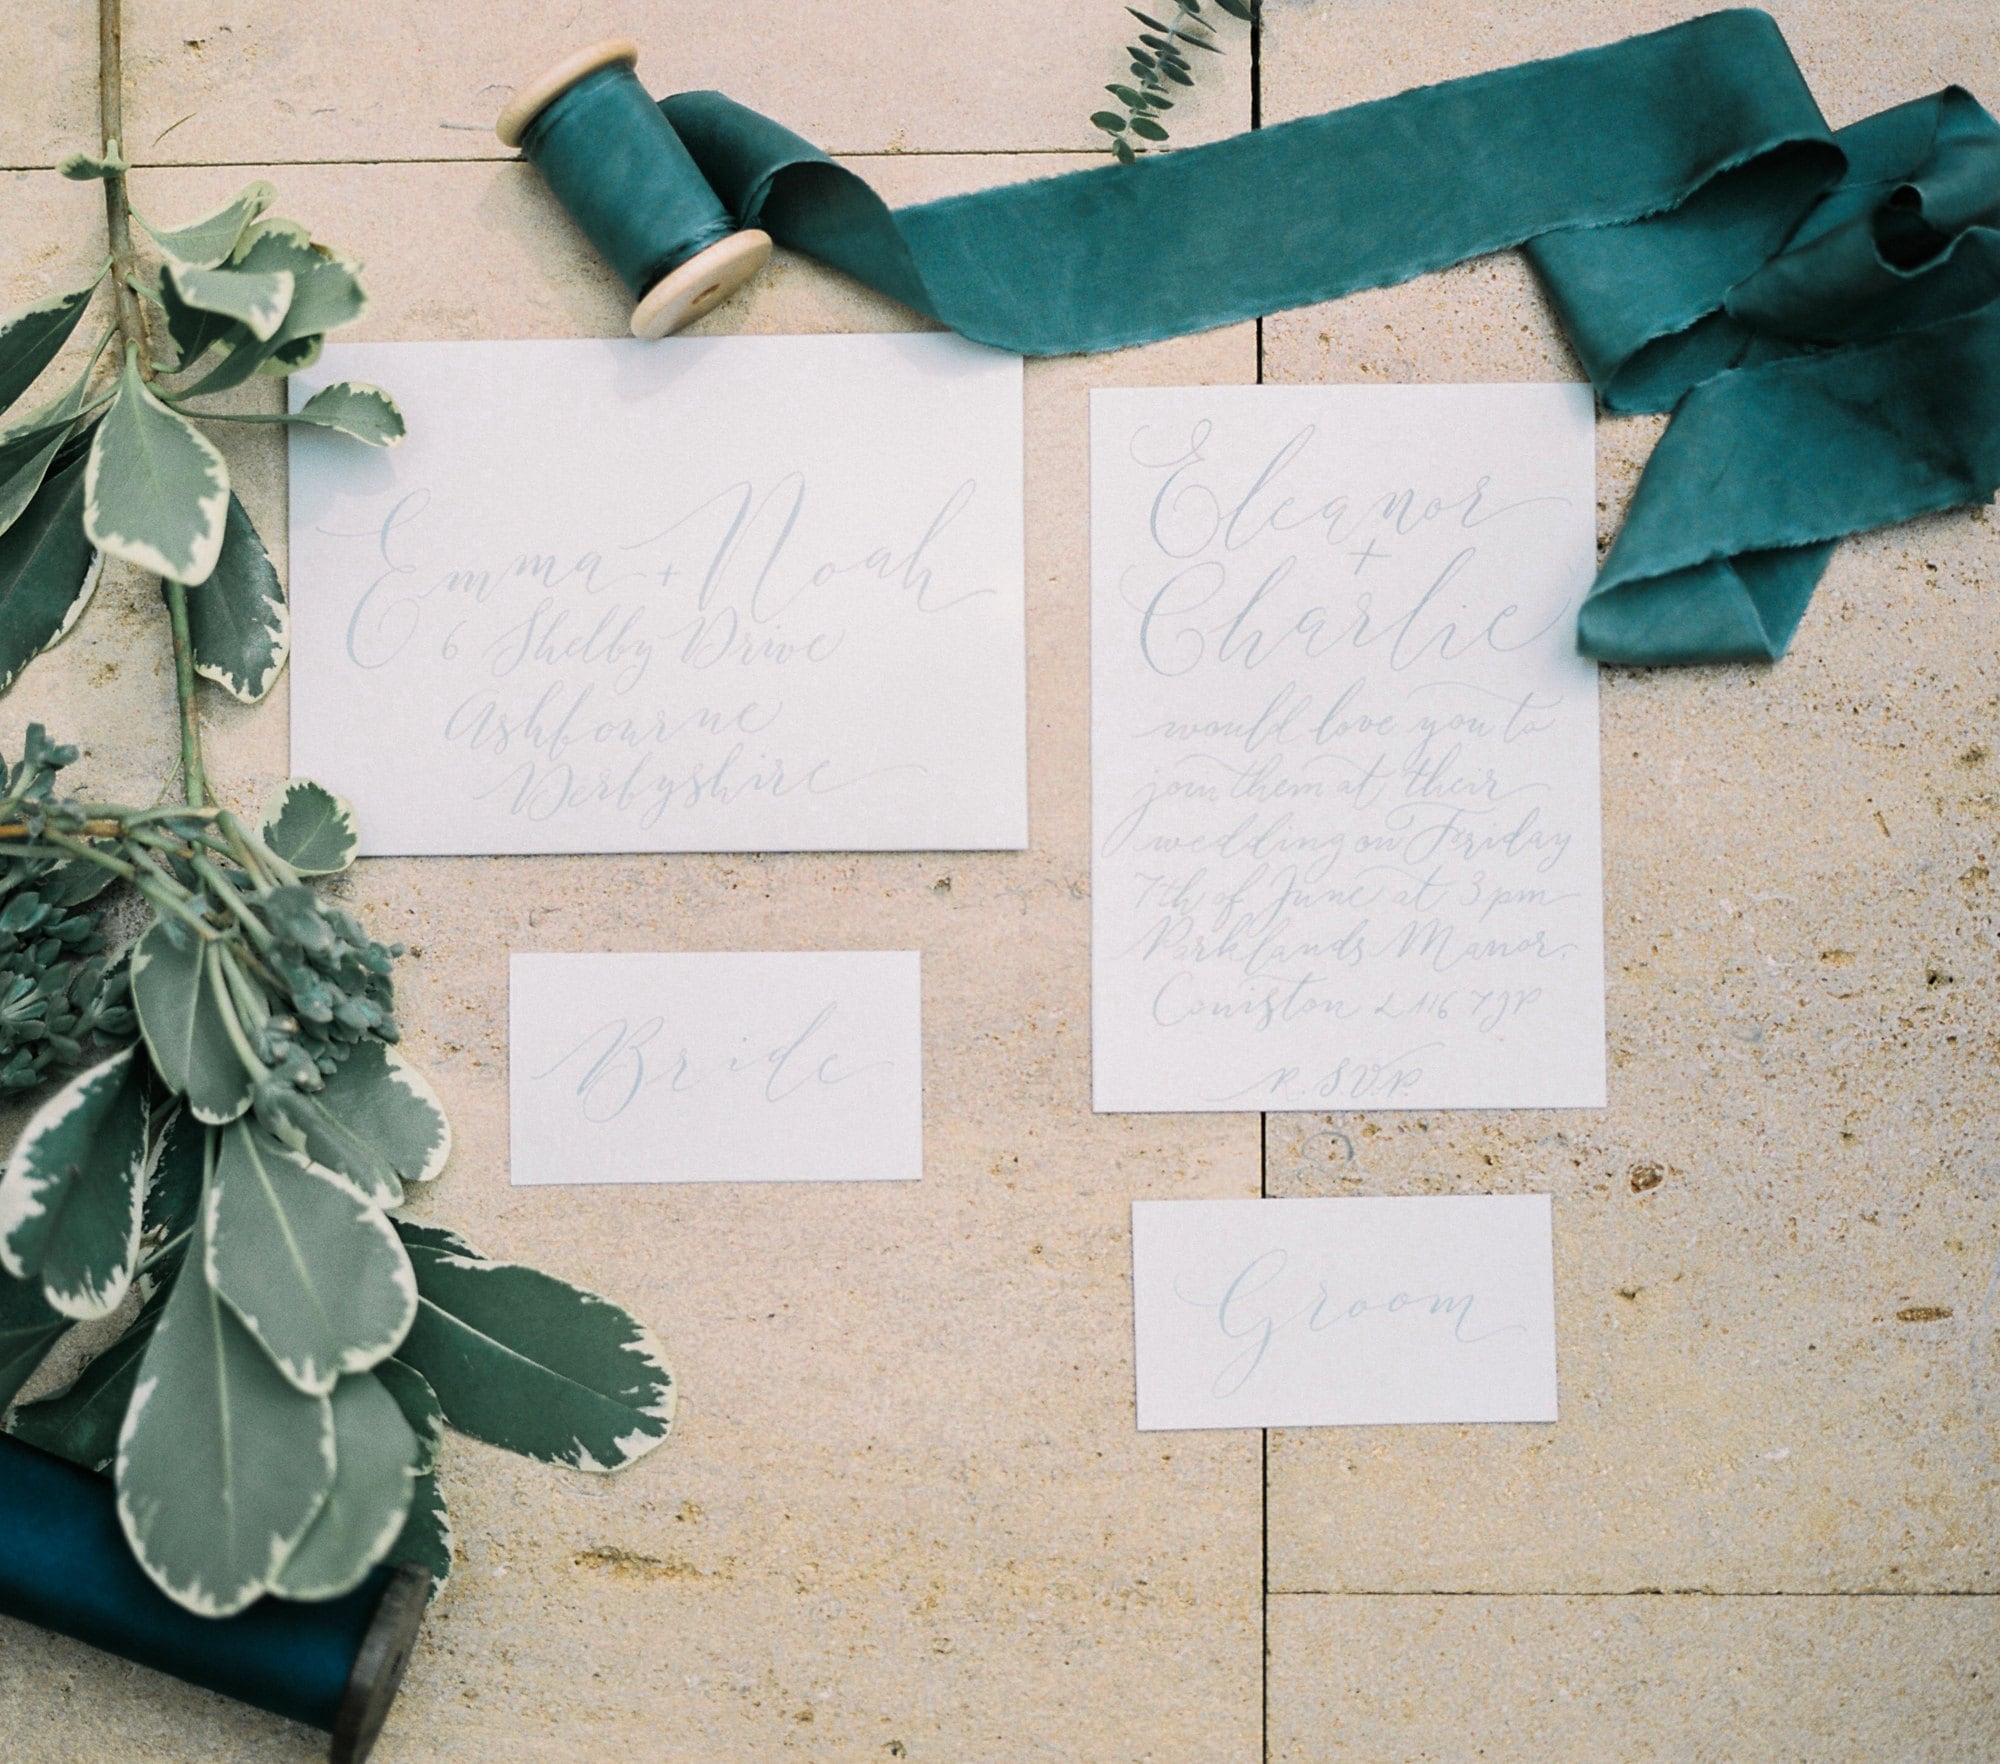 Calligraphy photography by Katie Julia